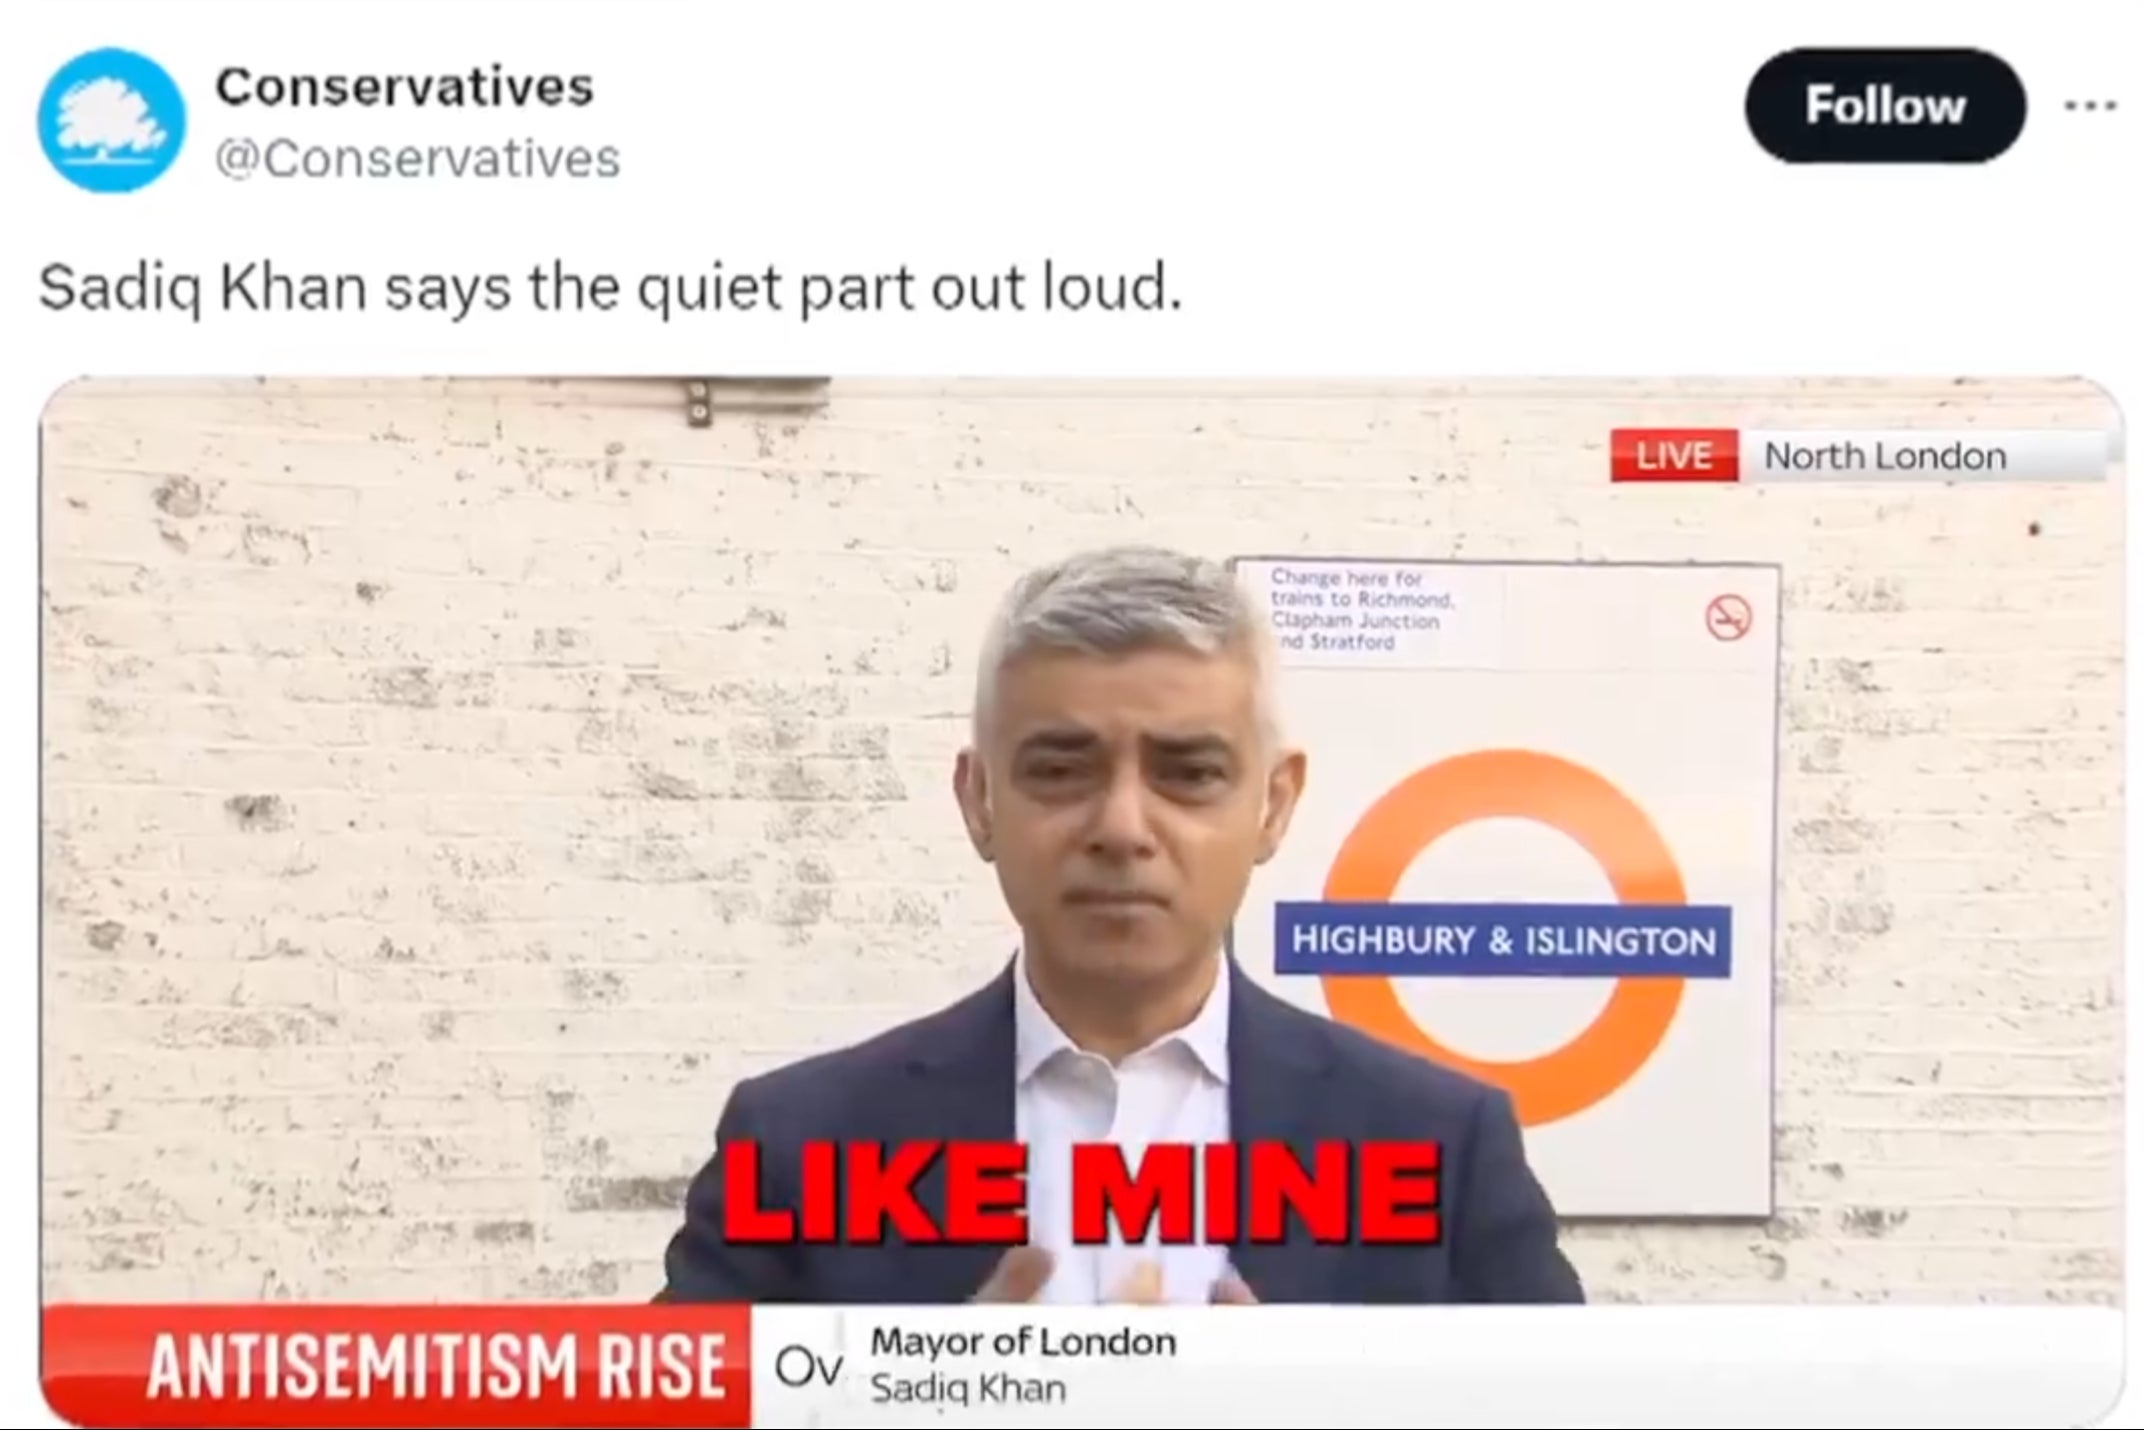 The misleading footage was published on the Conservatives’ official Twitter account